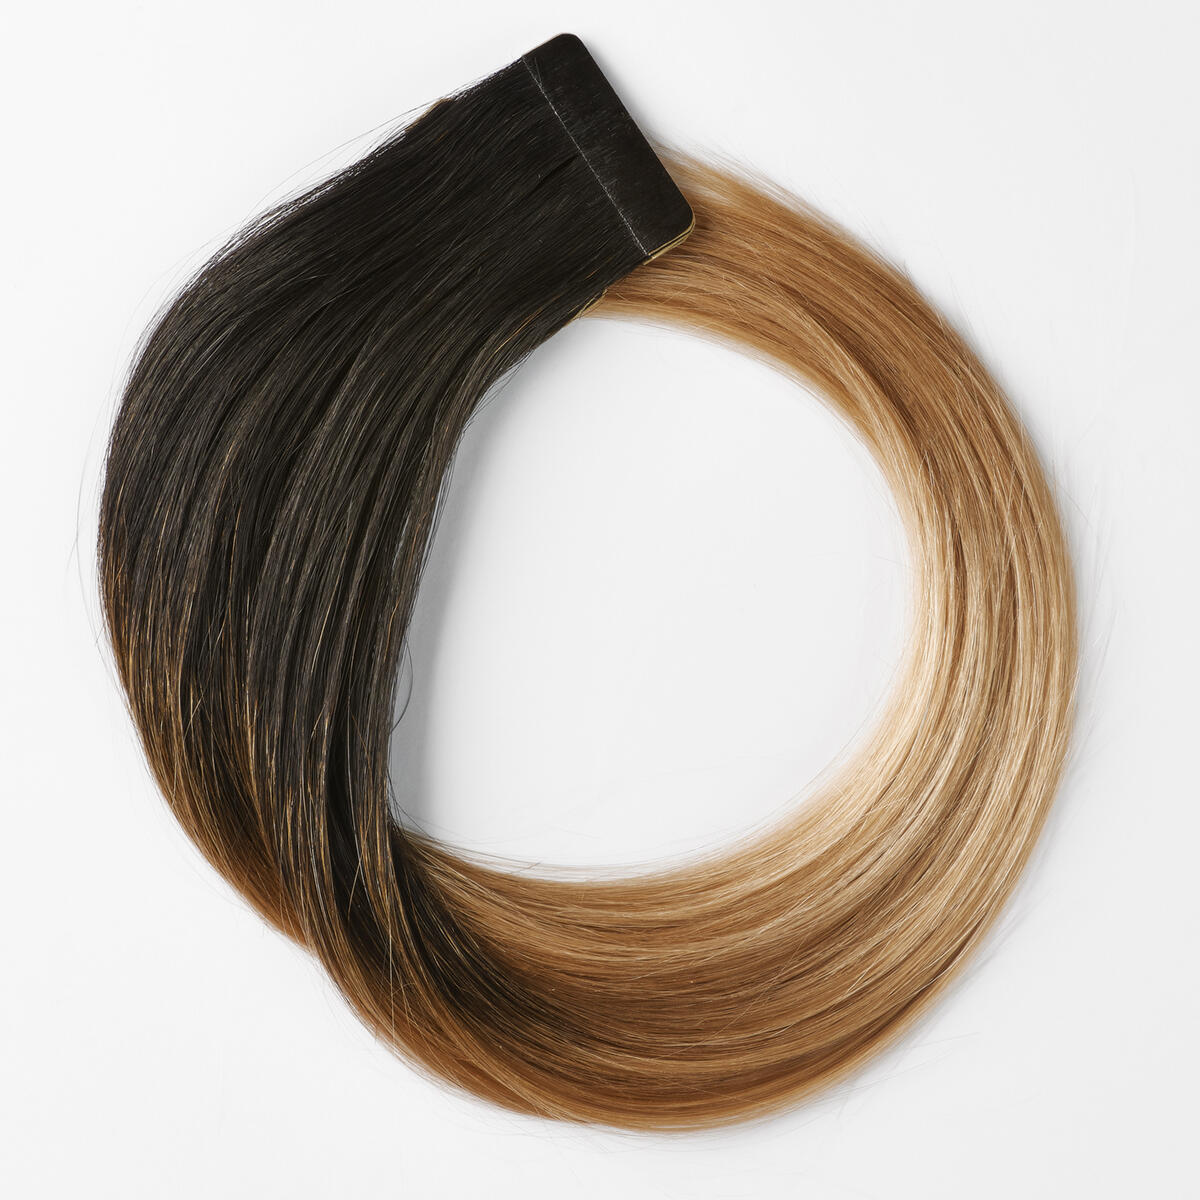 Basic Tape Extensions Classic 4 O1.2/7.5 Black Blond Ombre 40 cm